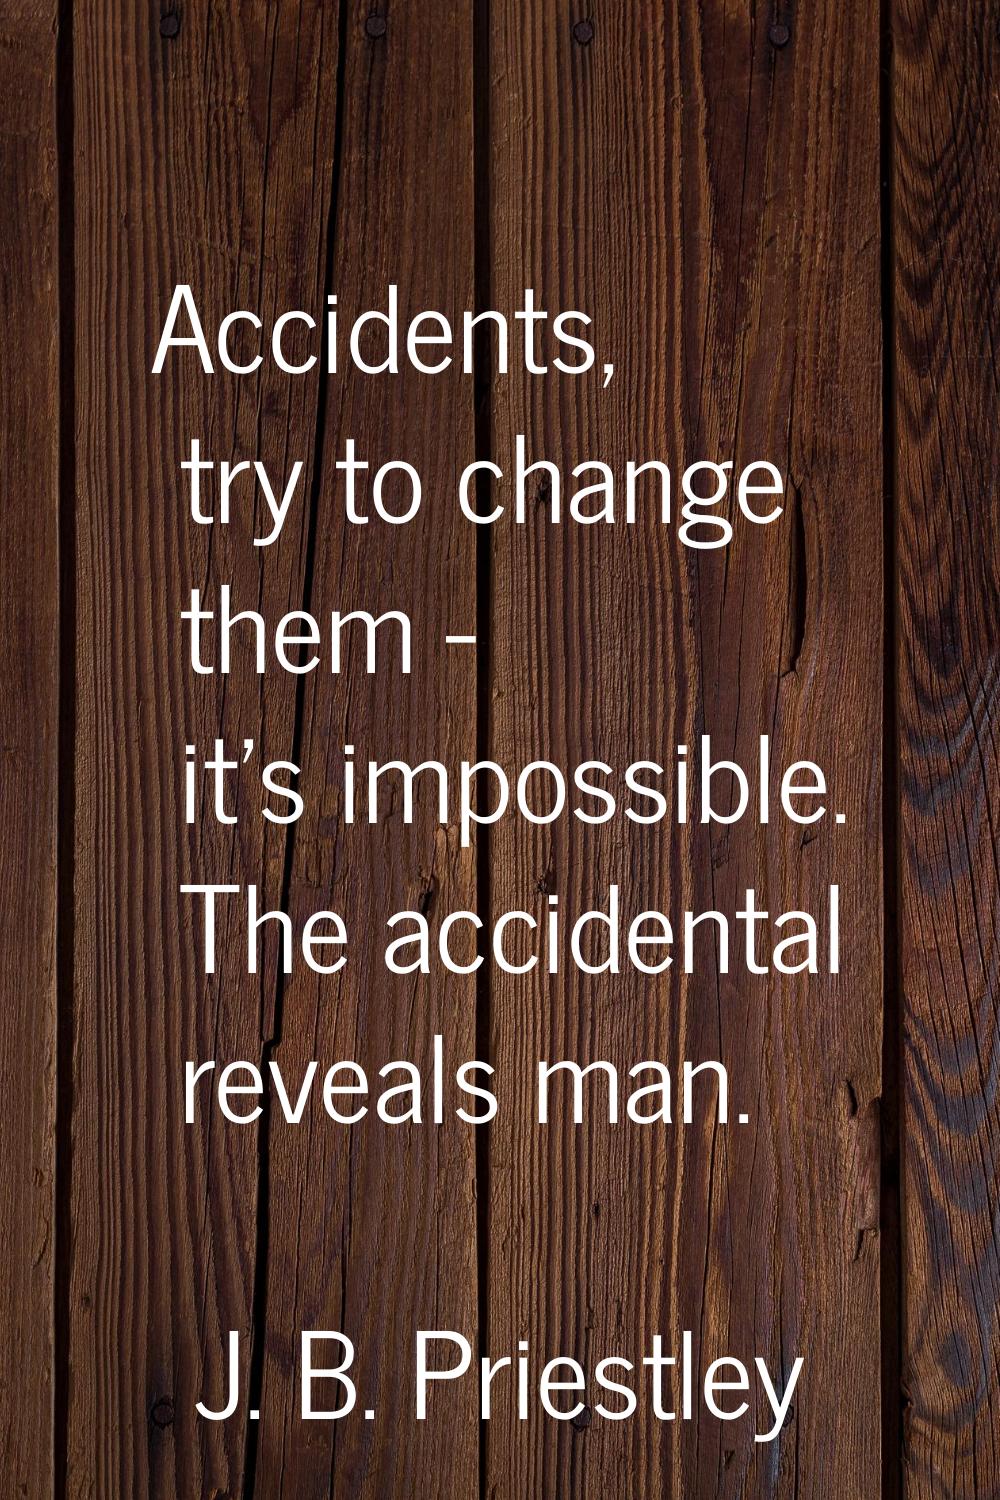 Accidents, try to change them - it's impossible. The accidental reveals man.